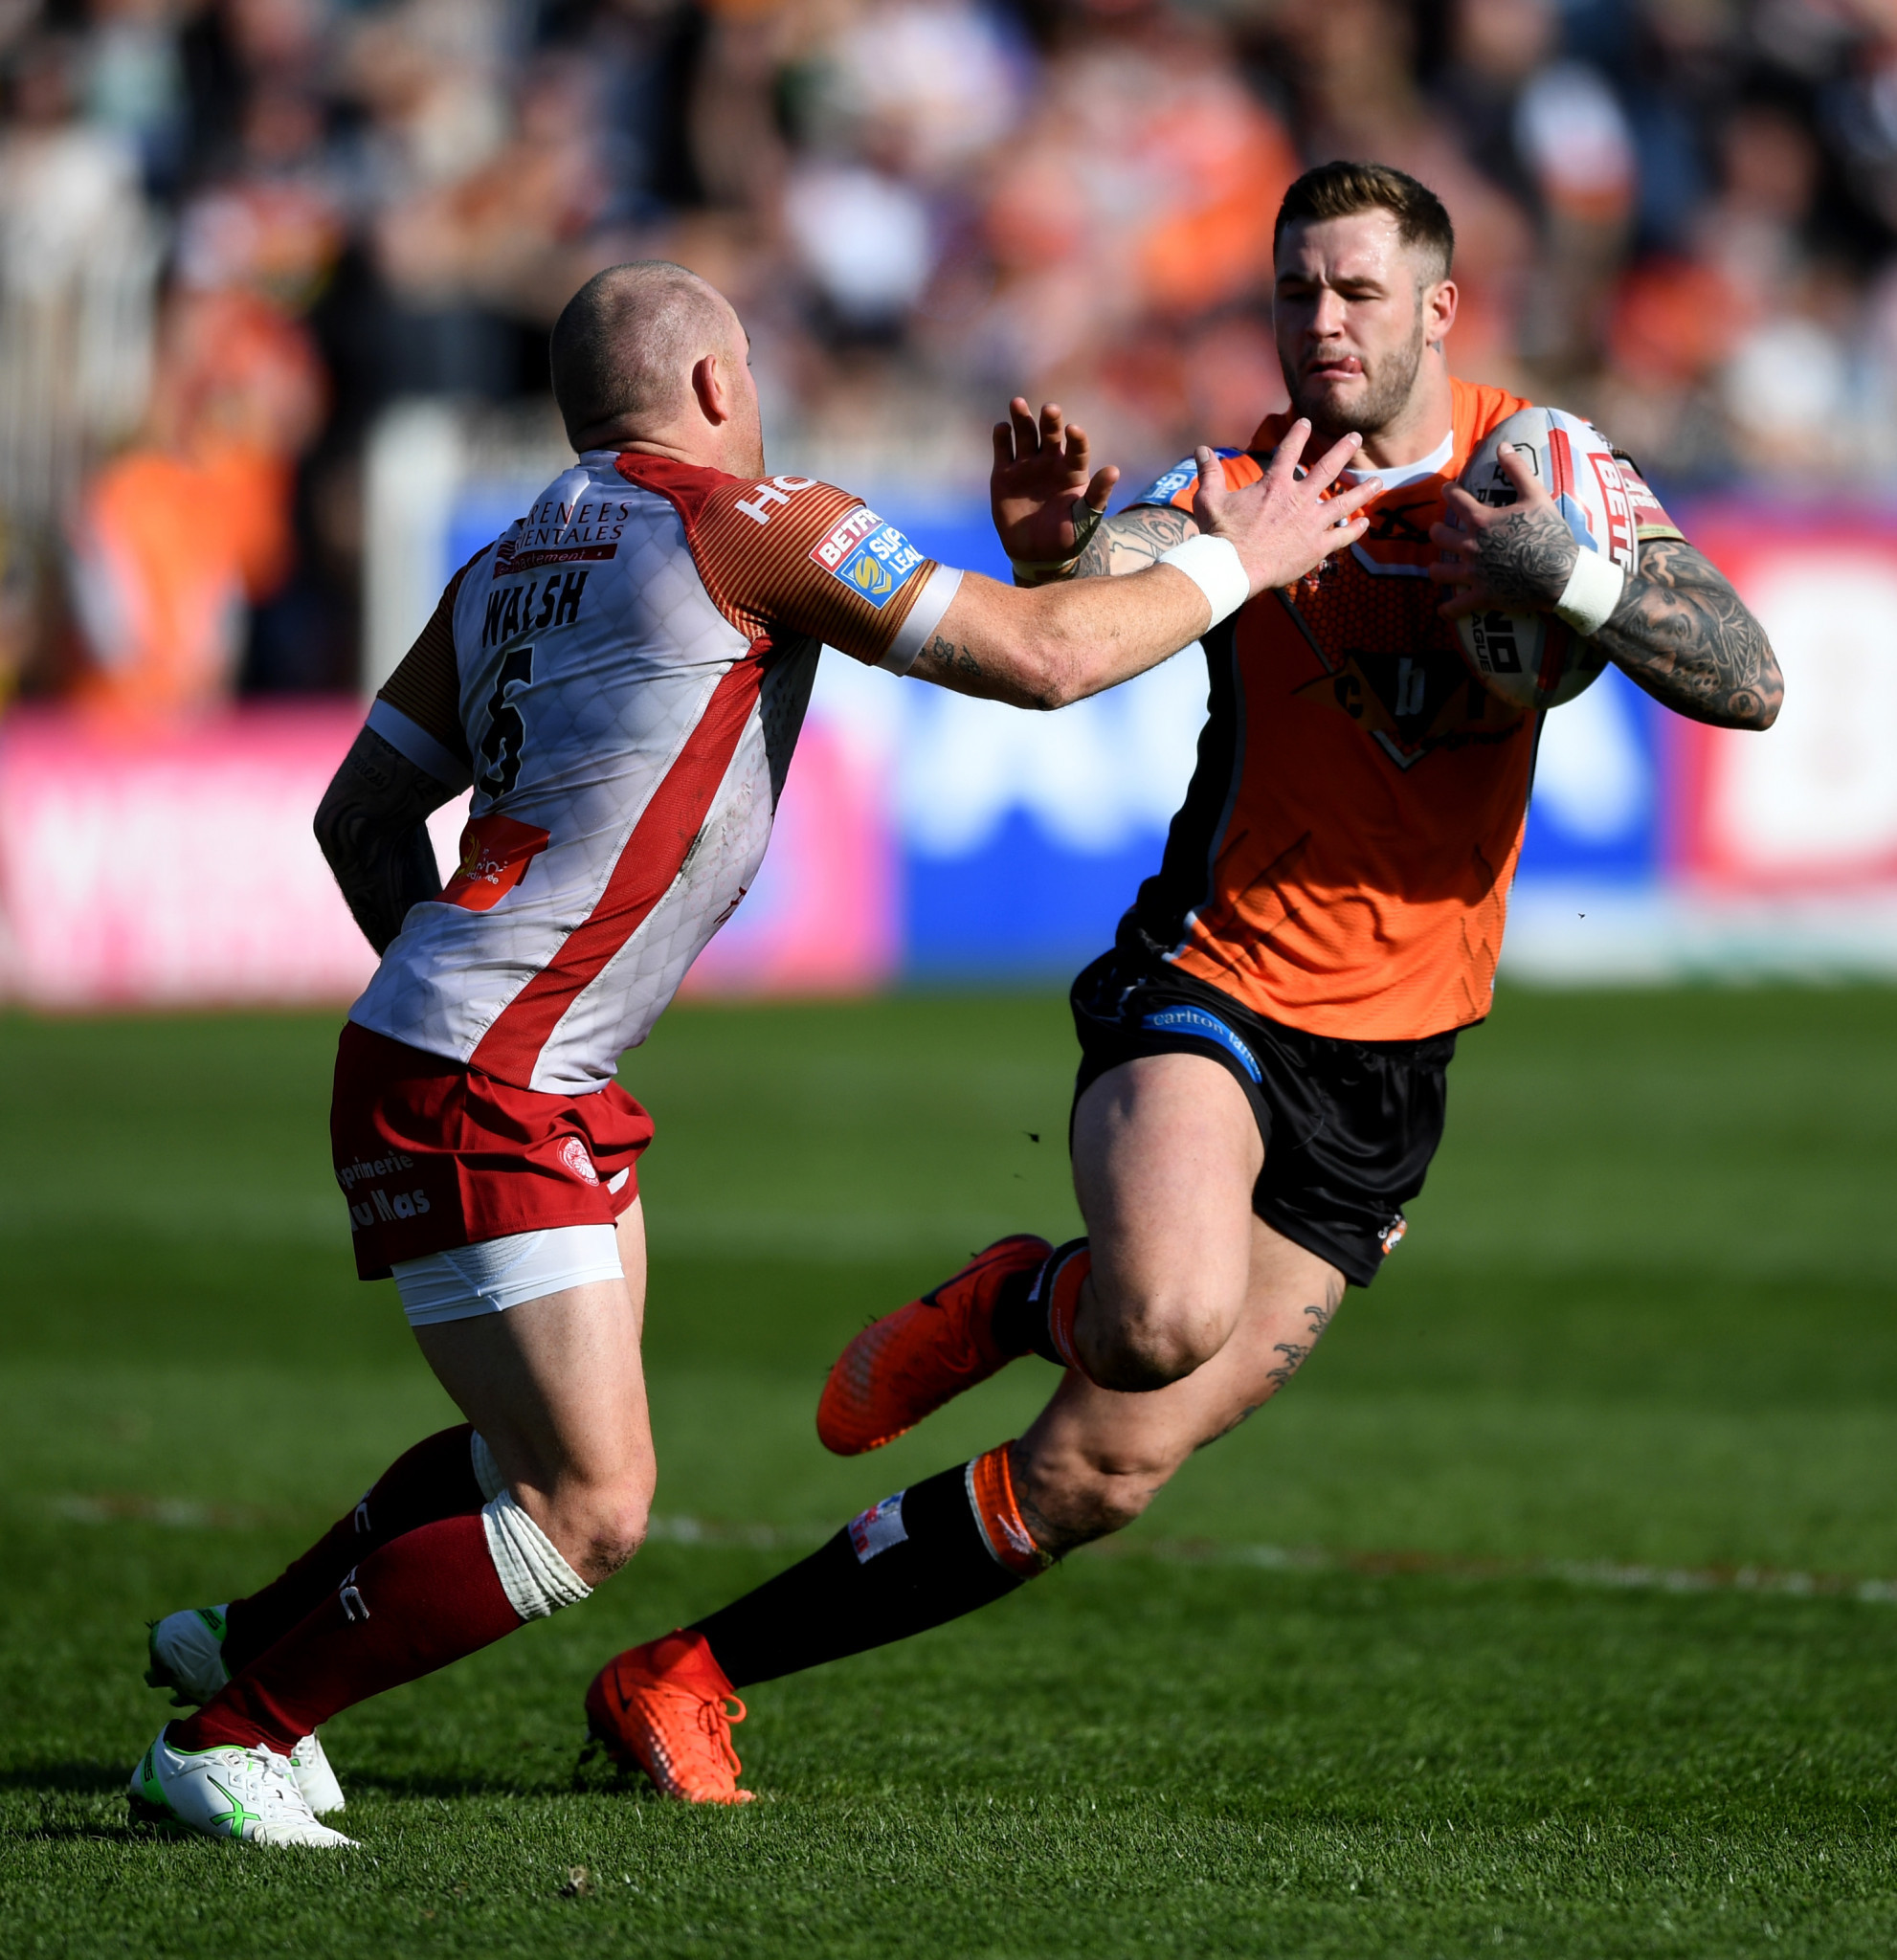 It has emerged that Zak Hardaker, who is awaiting punishment from UKAD following a positive test for cocaine, has been released by his rugby league club, Castleford Tigers ©Getty Images